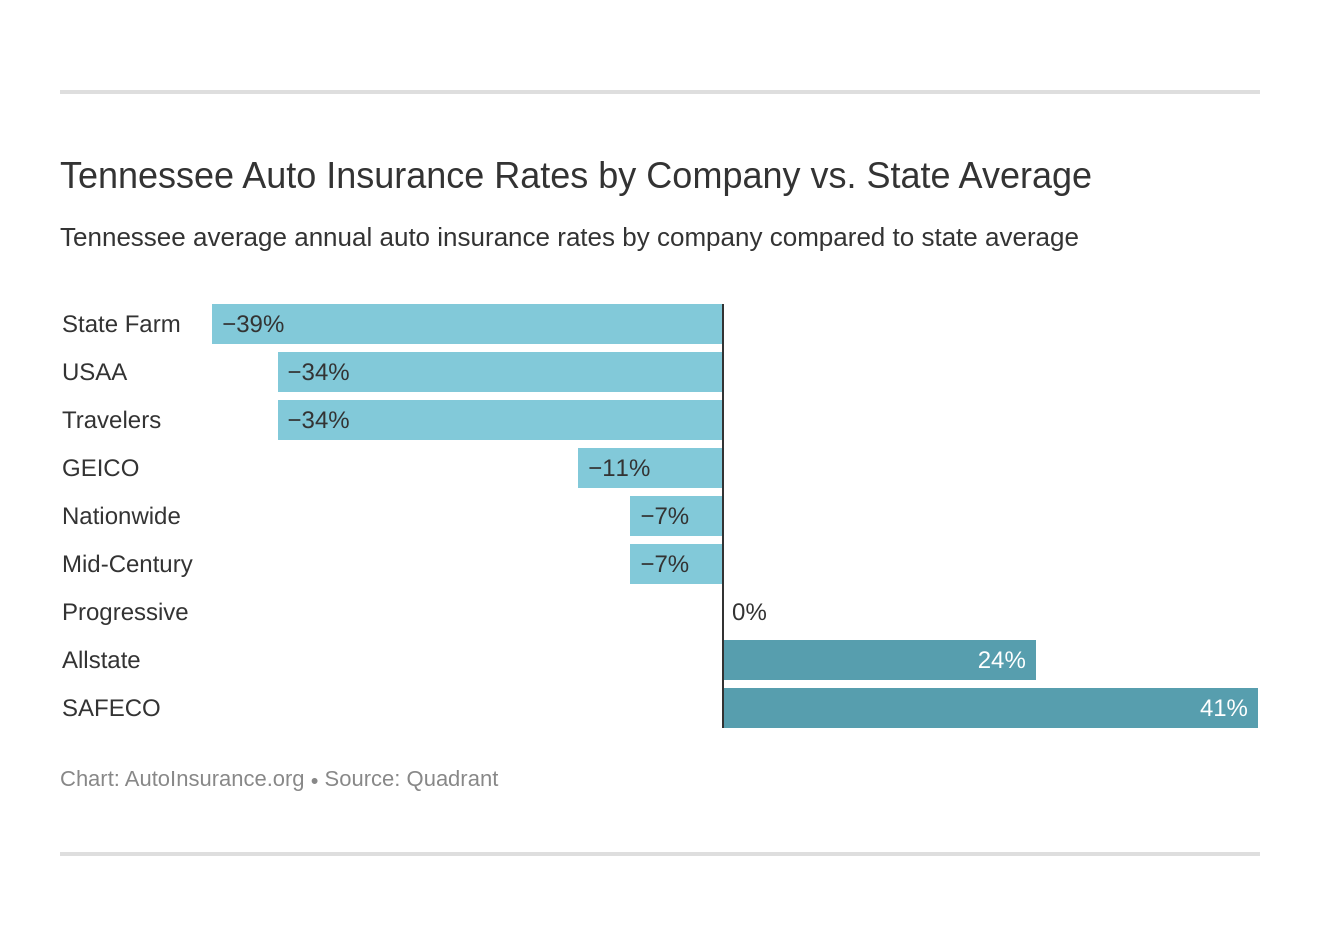 Tennessee Auto Insurance Rates by Company vs. State Average